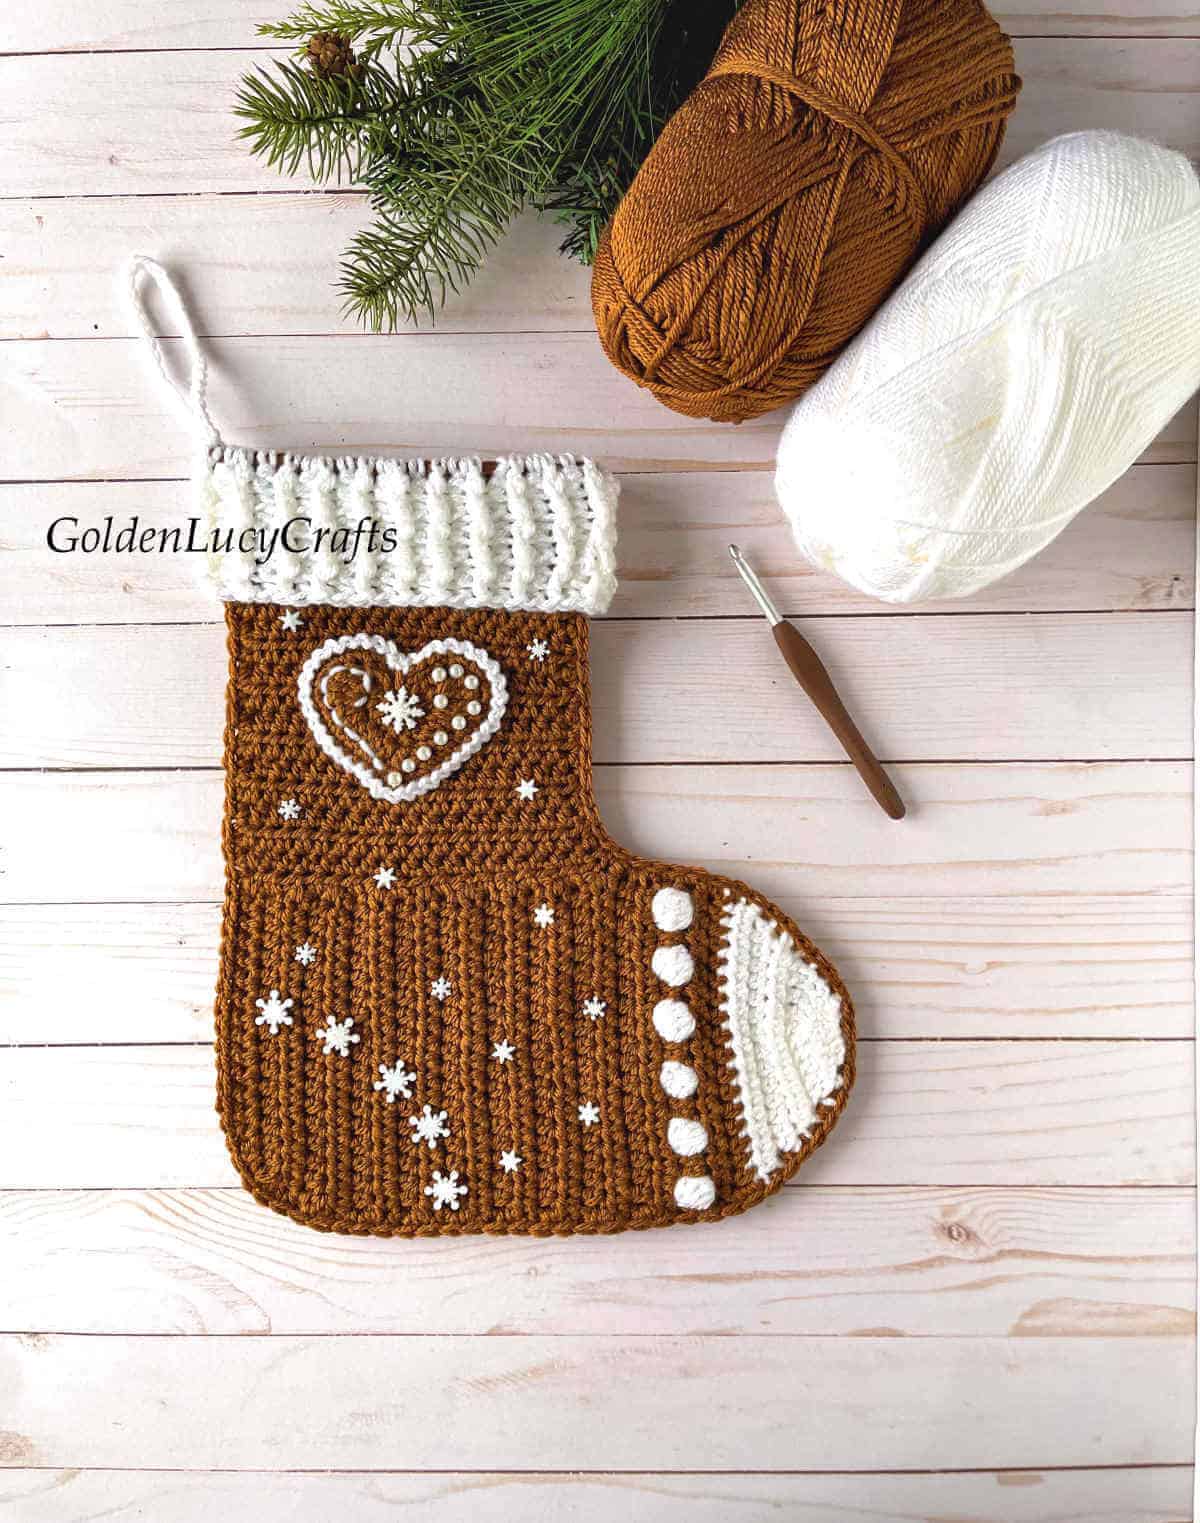 Crochet gingerbread Christmas stocking, crochet hook, two skeins of yarn, Christmas tree branch in the background.